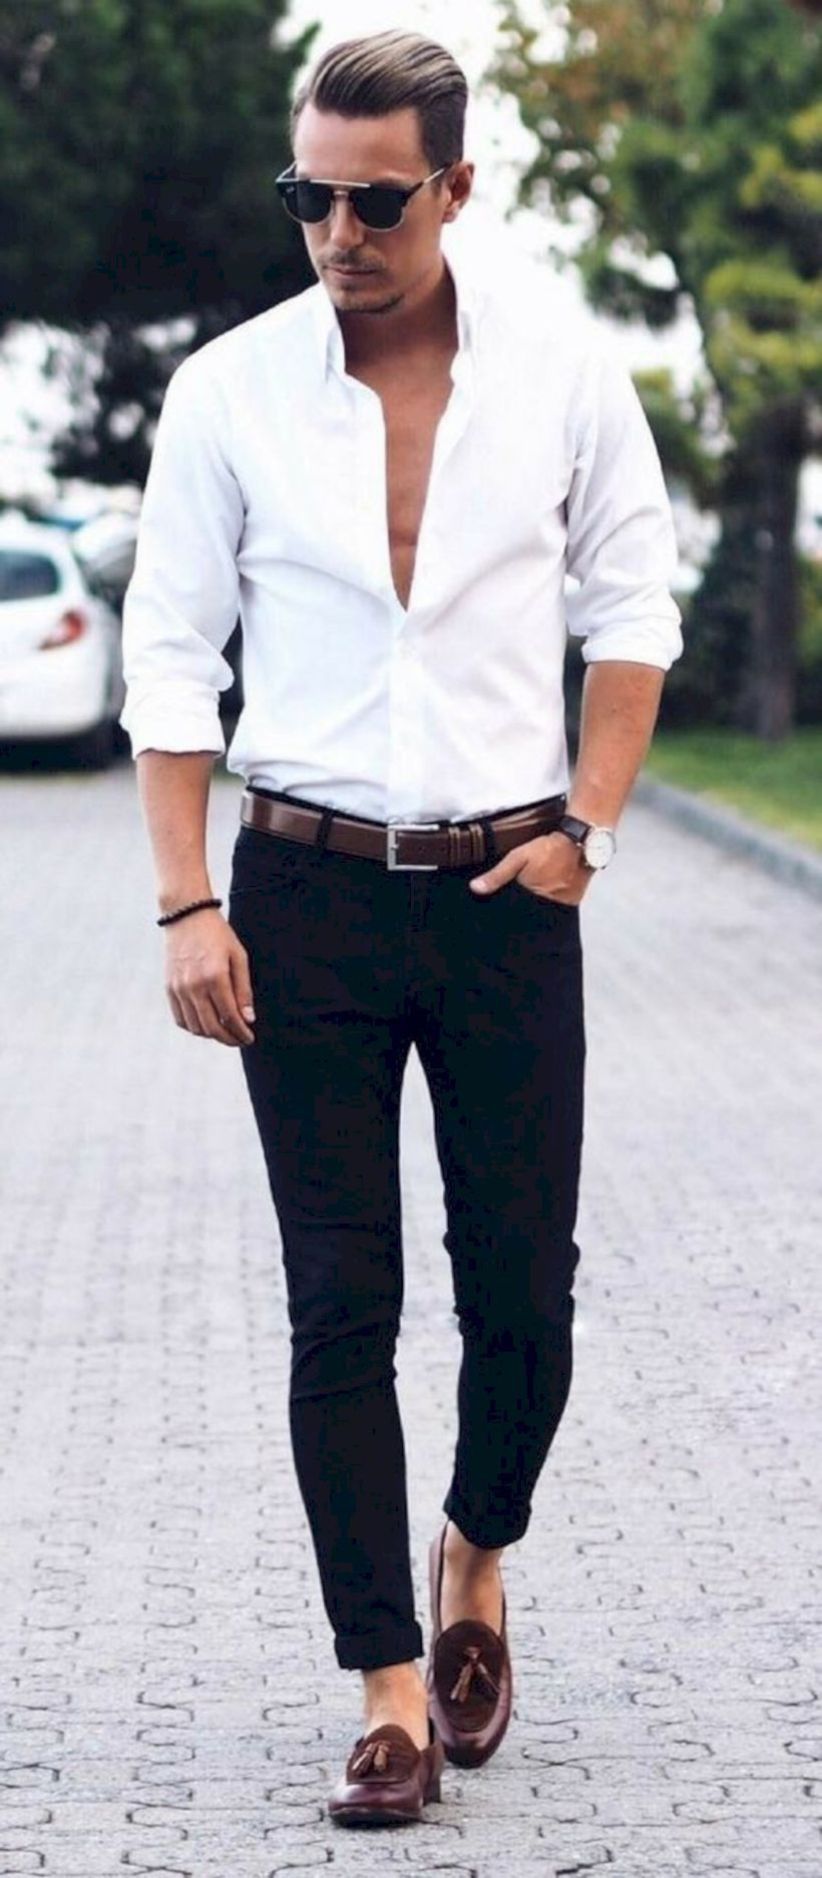 Summer Party Outfit Mens